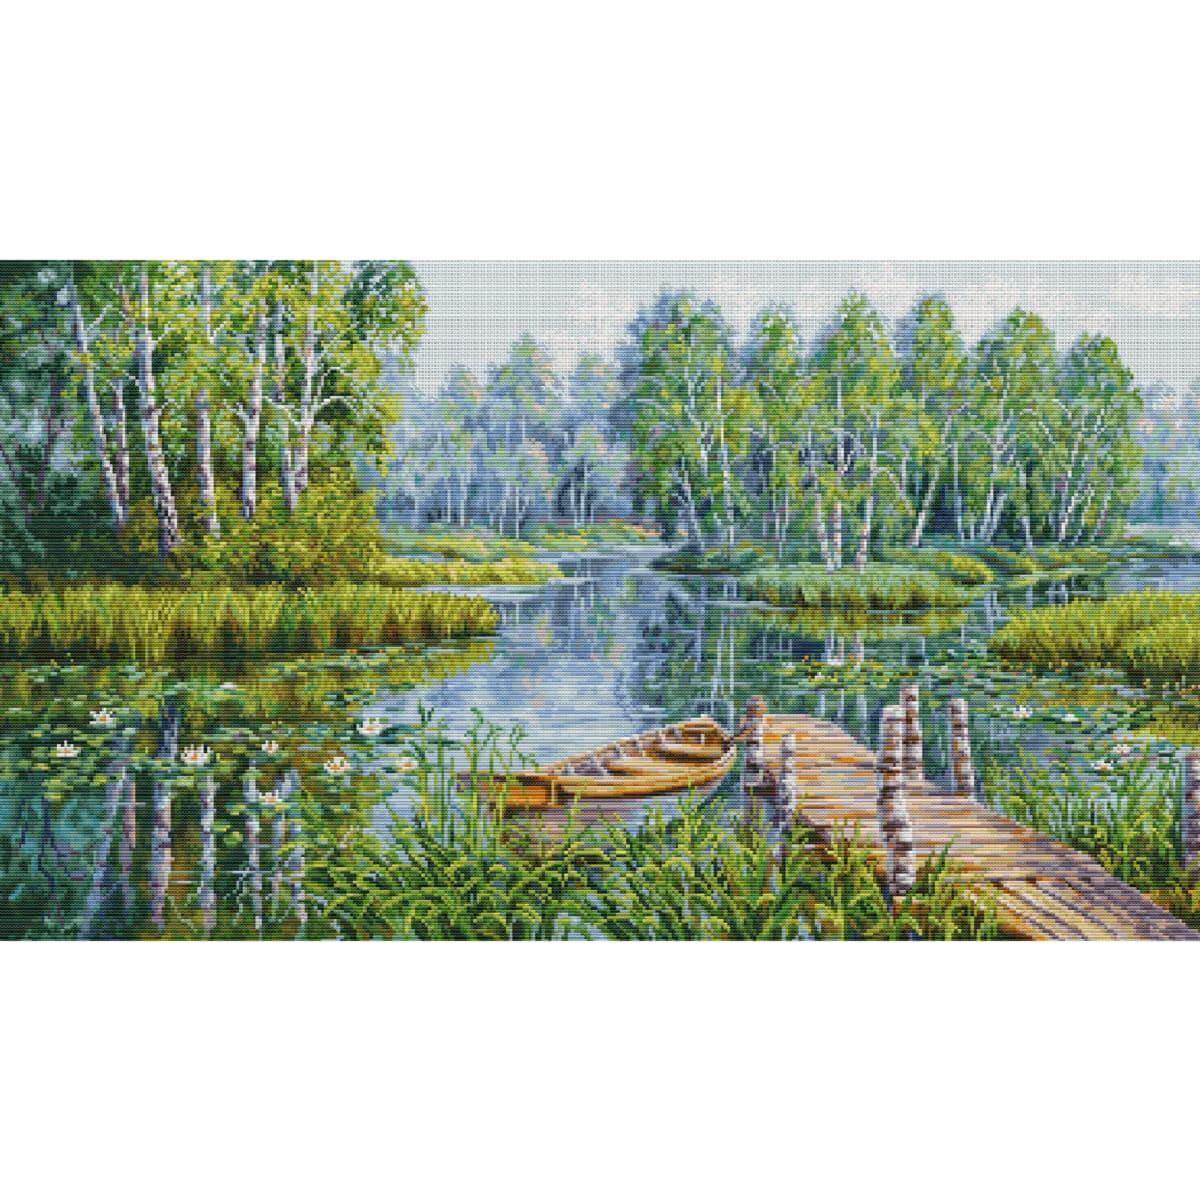 A tranquil landscape shows a wooden jetty jutting out...